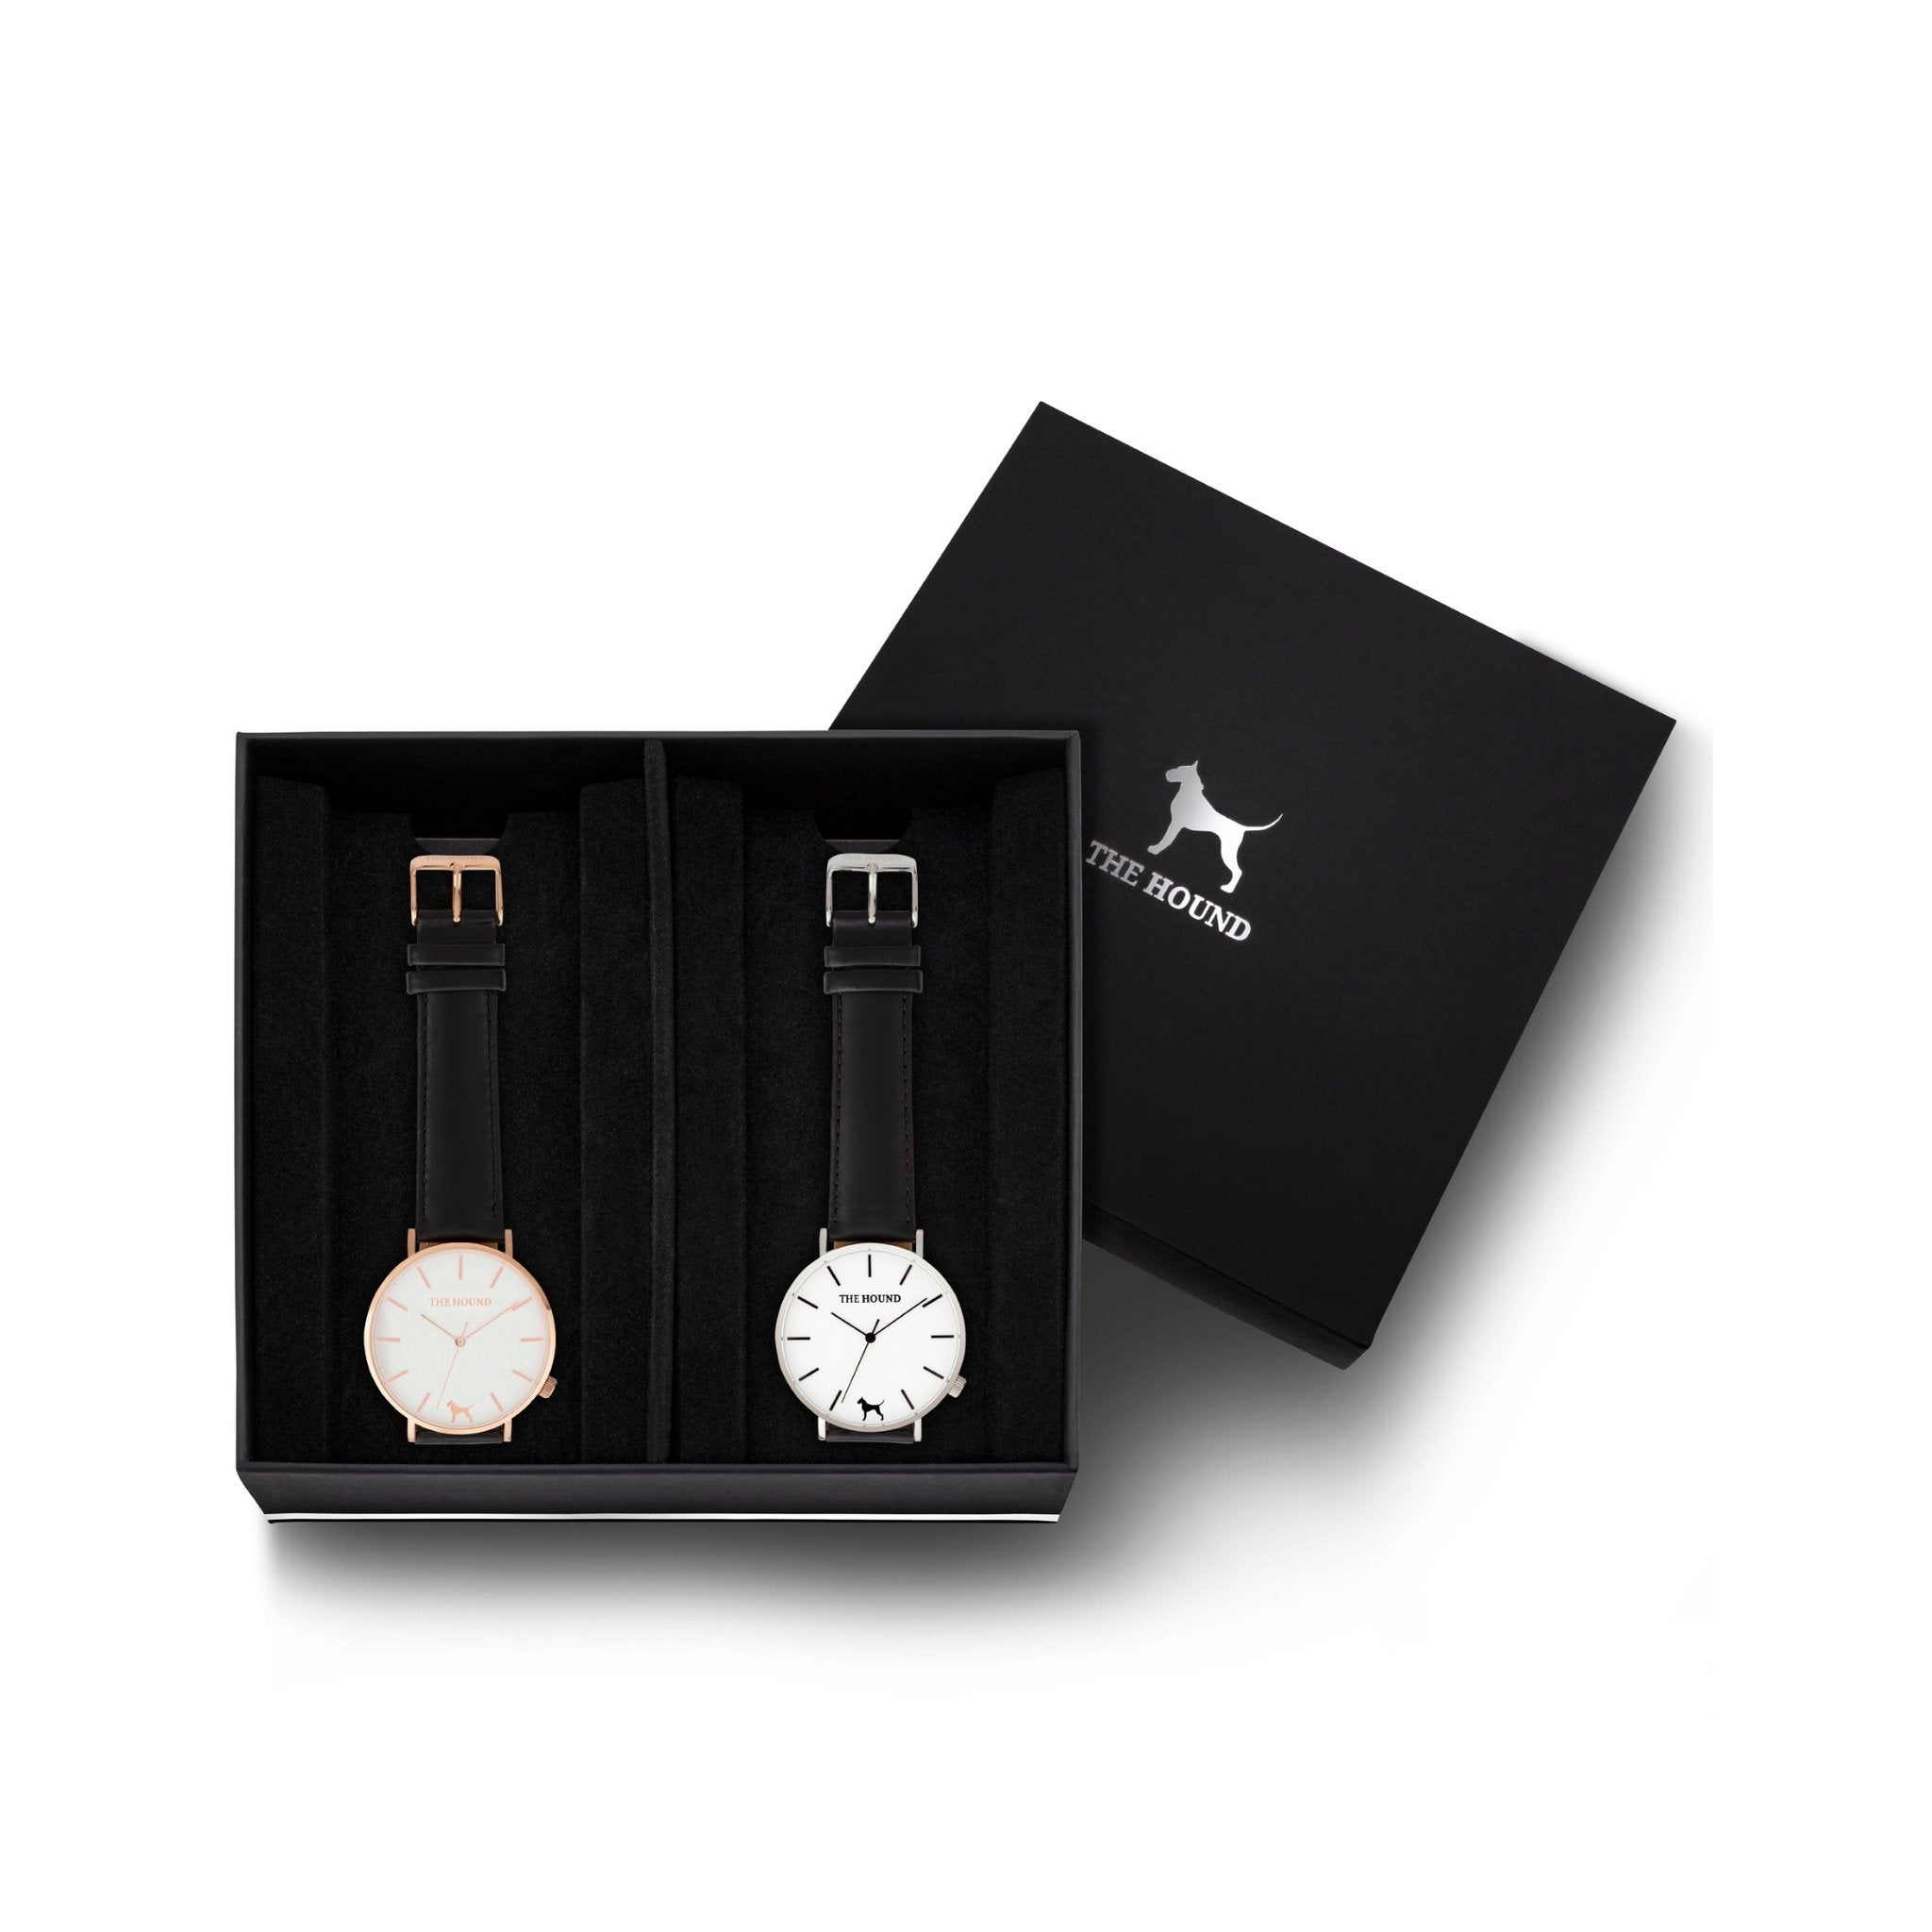 Custom gift set - Rose gold and white watch with stitched black genuine leather band and a silver and white watch with stitched black genuine leather band